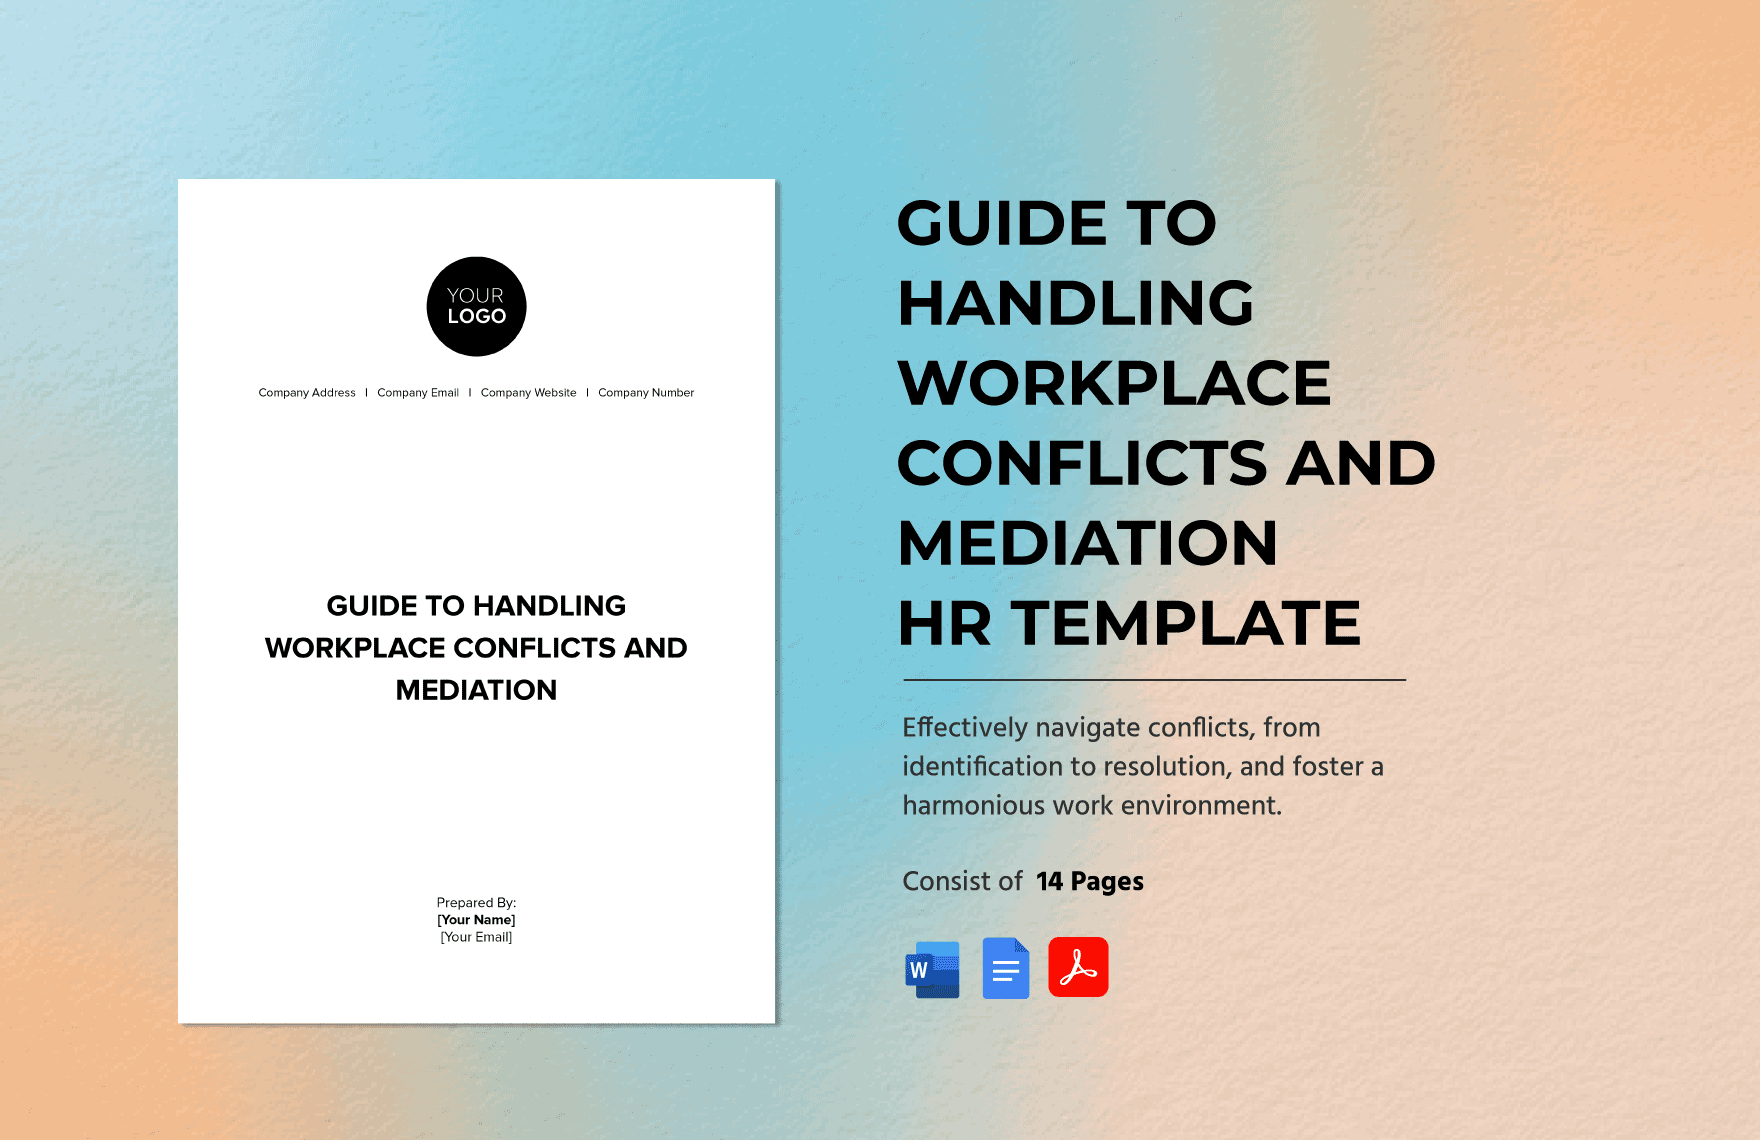 Guide to Handling Workplace Conflicts and Mediation HR Template